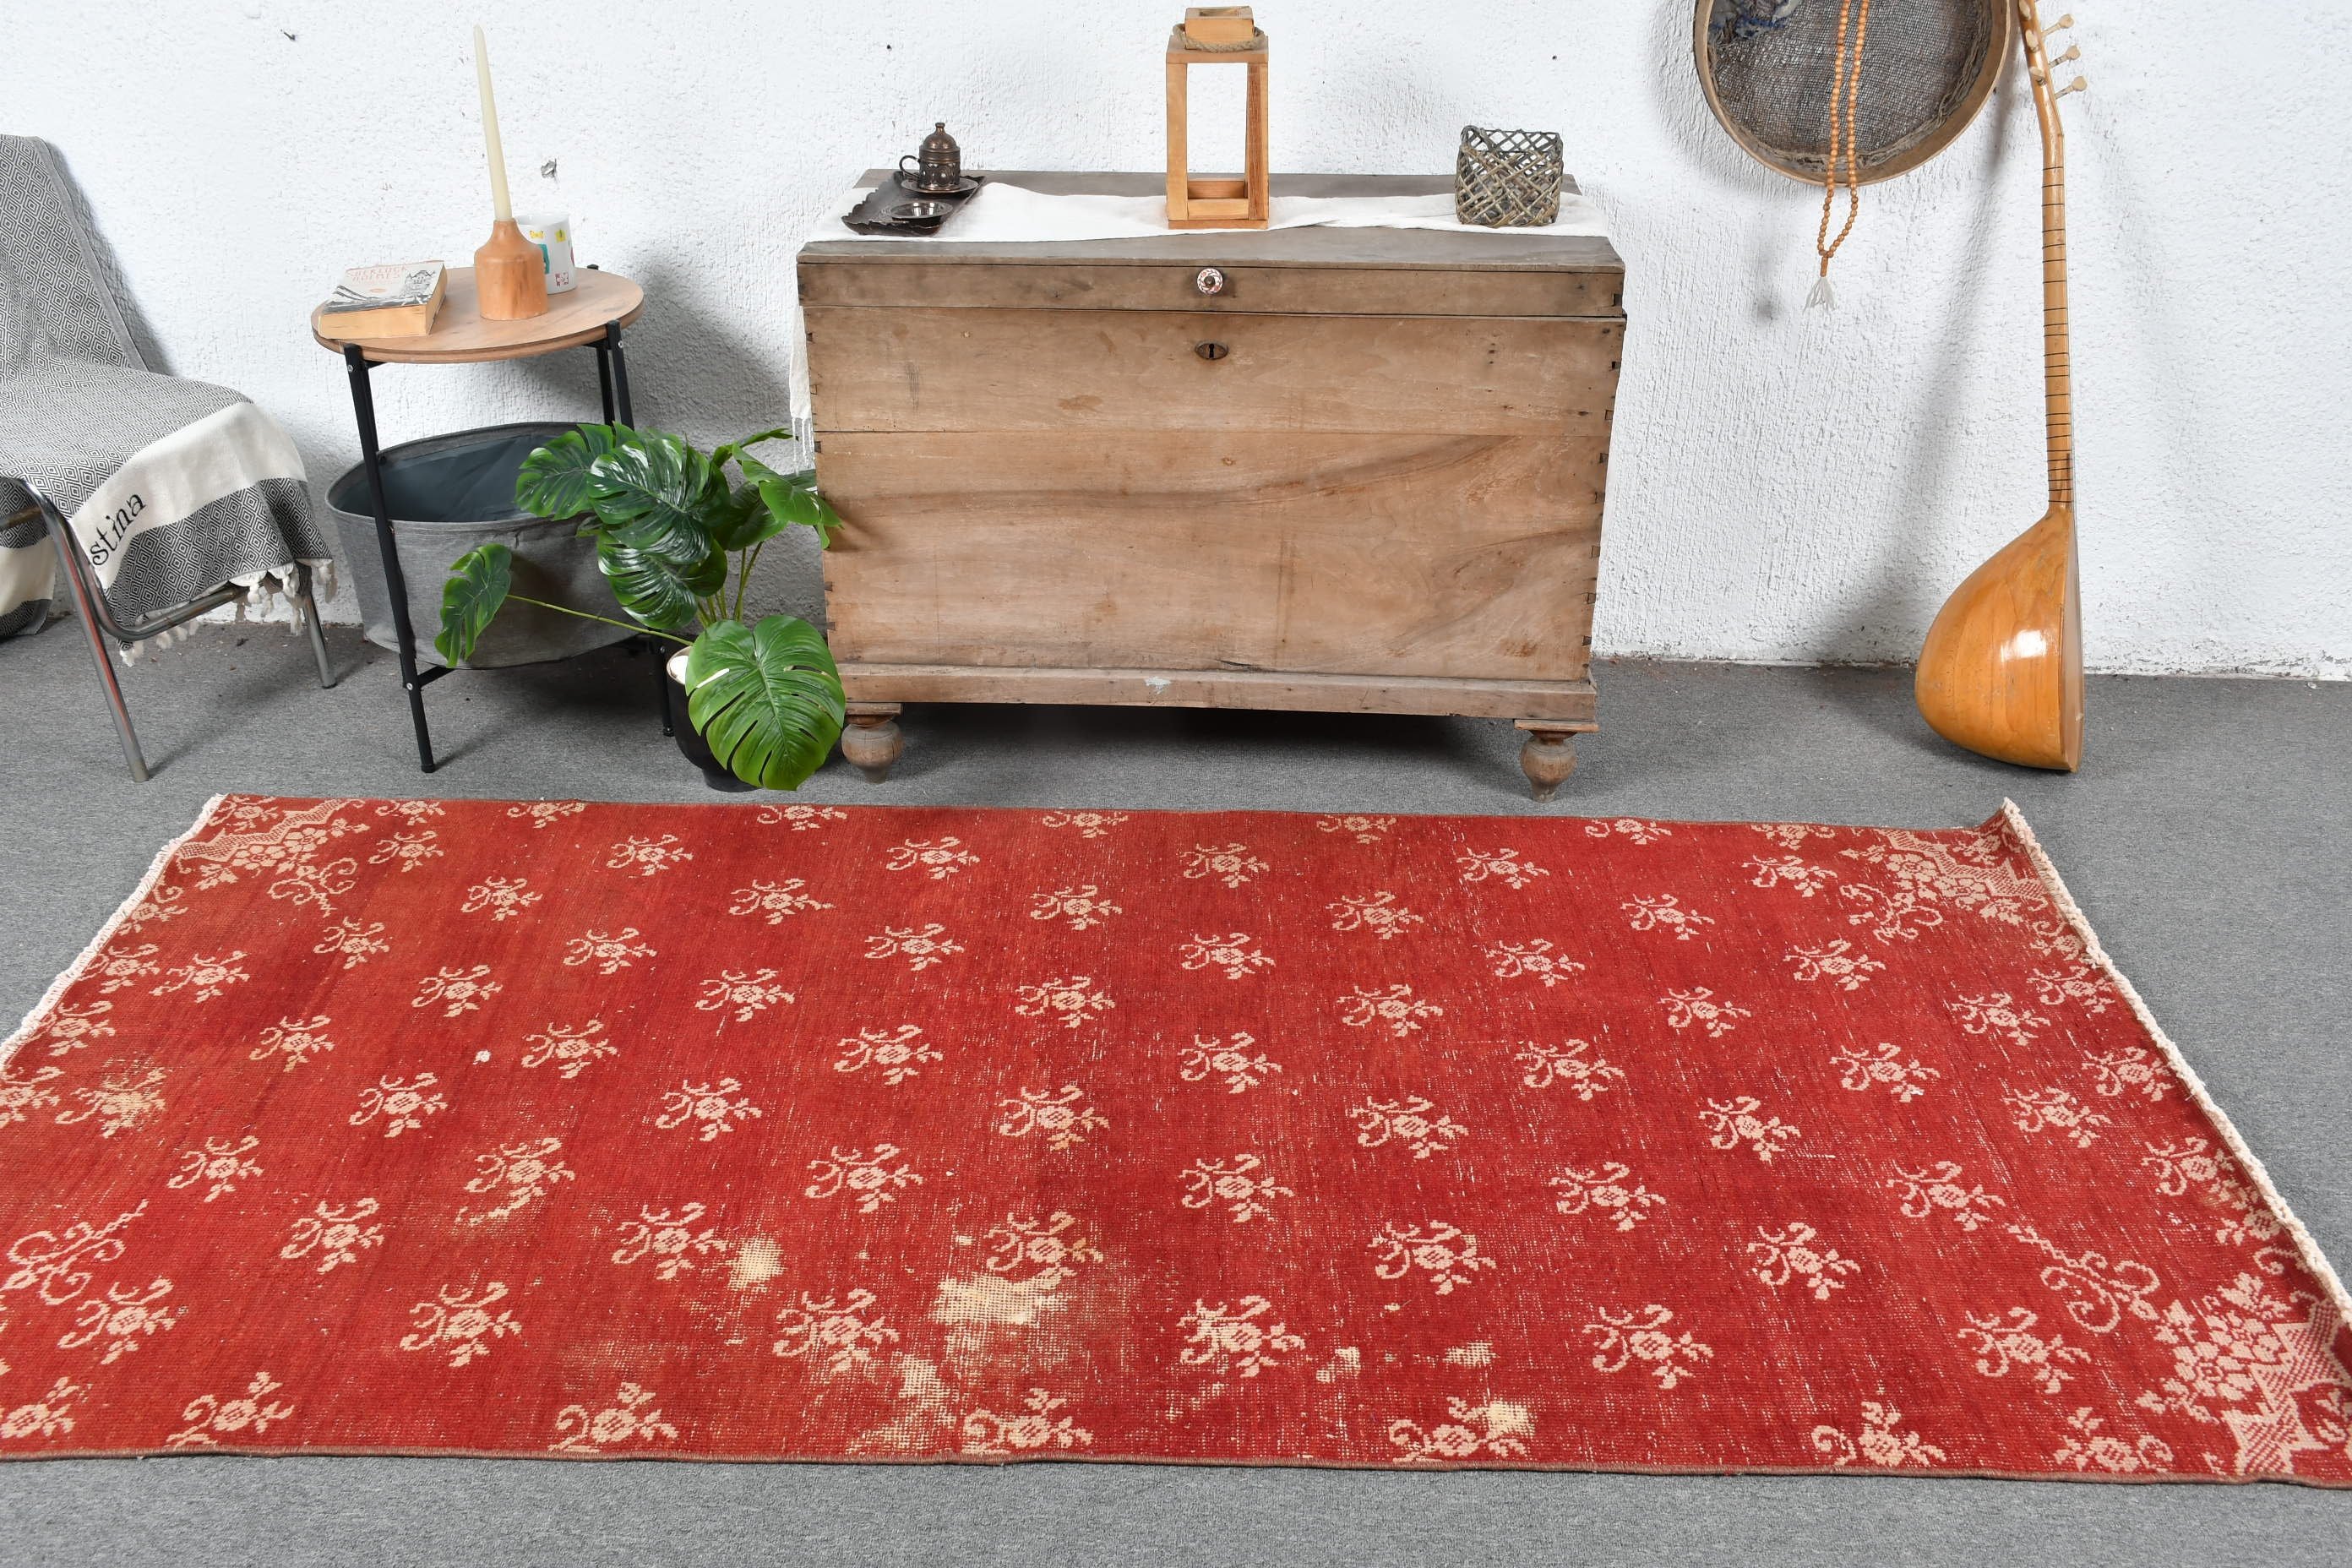 Red Home Decor Rugs, Vintage Rugs, Home Decor Rugs, Bedroom Rugs, 3.9x7.8 ft Area Rug, Living Room Rugs, Turkish Rugs, Antique Rugs